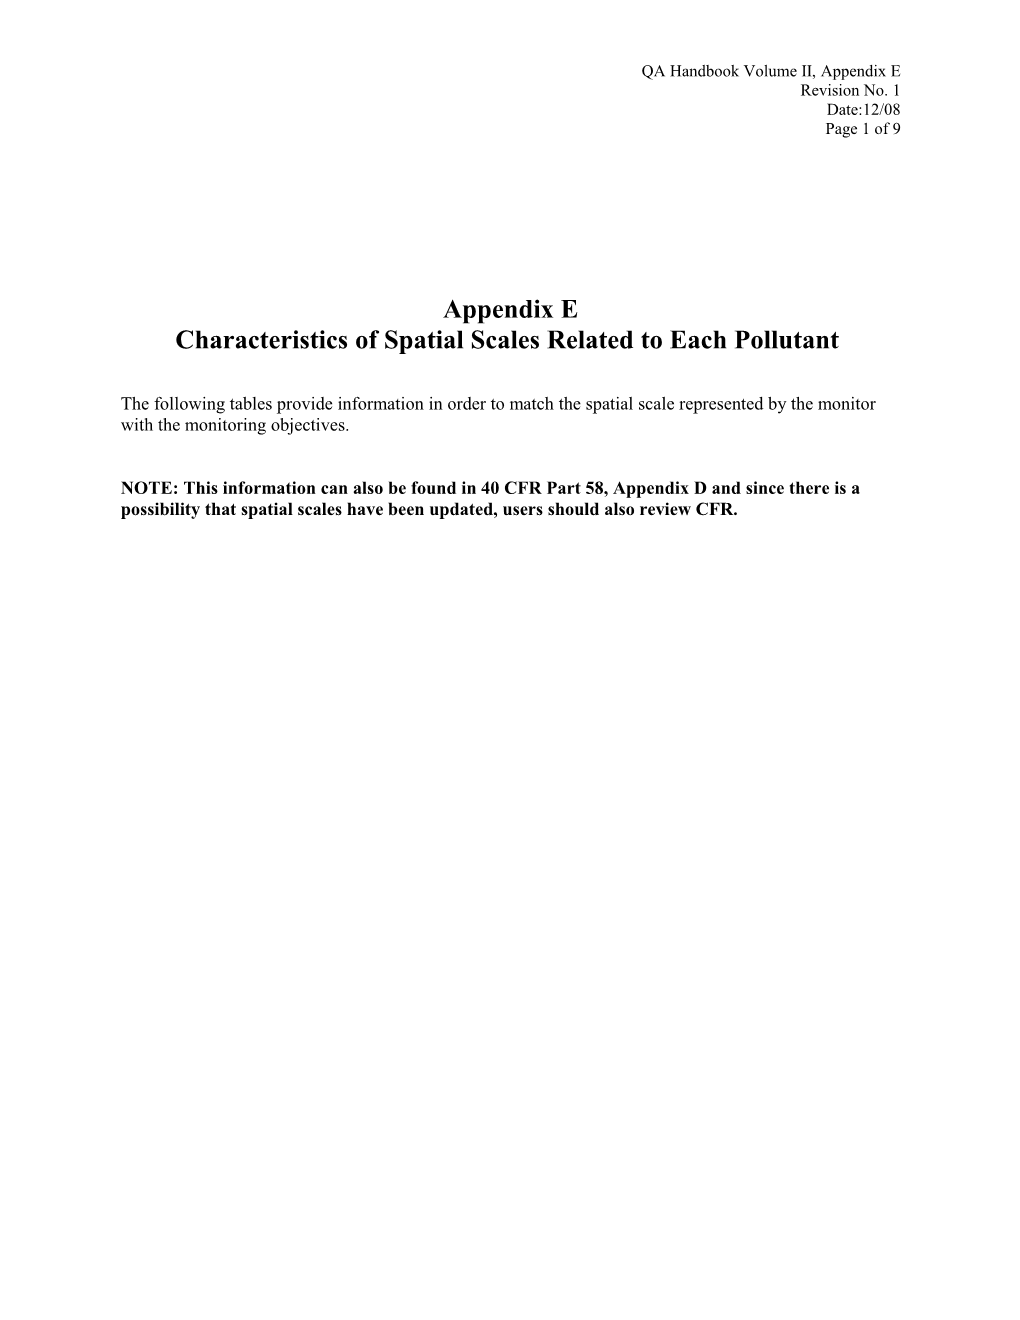 Characteristics of Spatial Scales Related to Each Pollutant